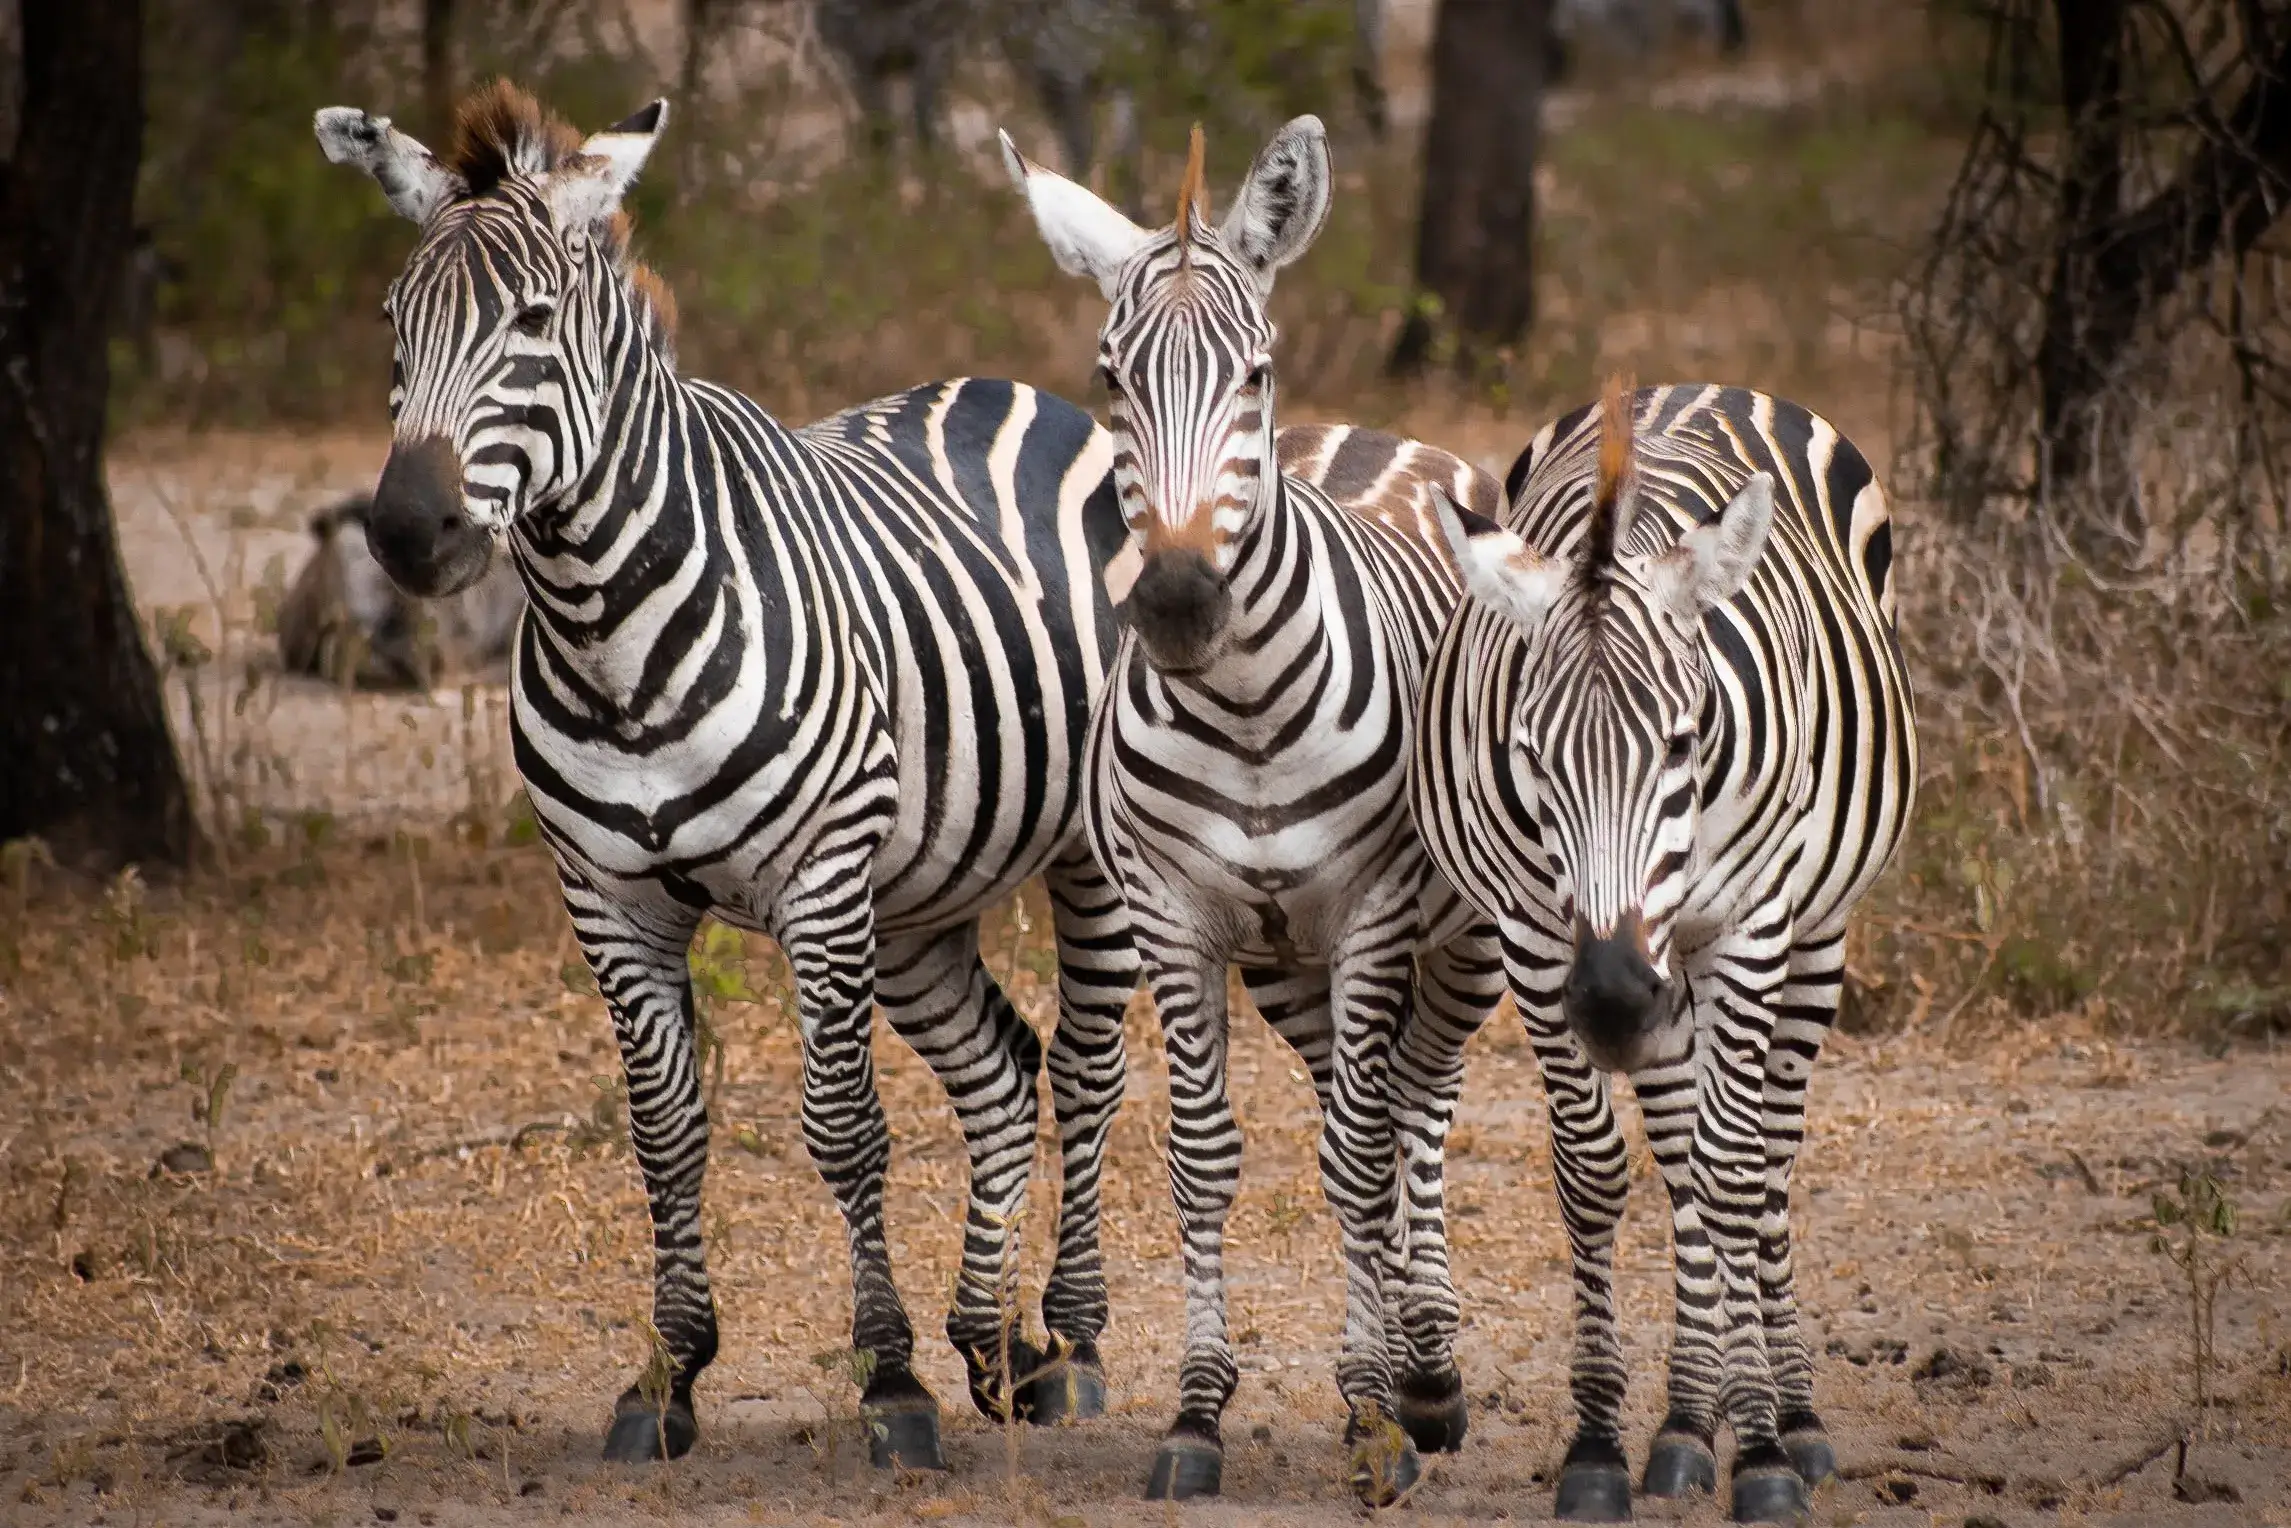 A dazzle of zebra's from Tanzanian national park